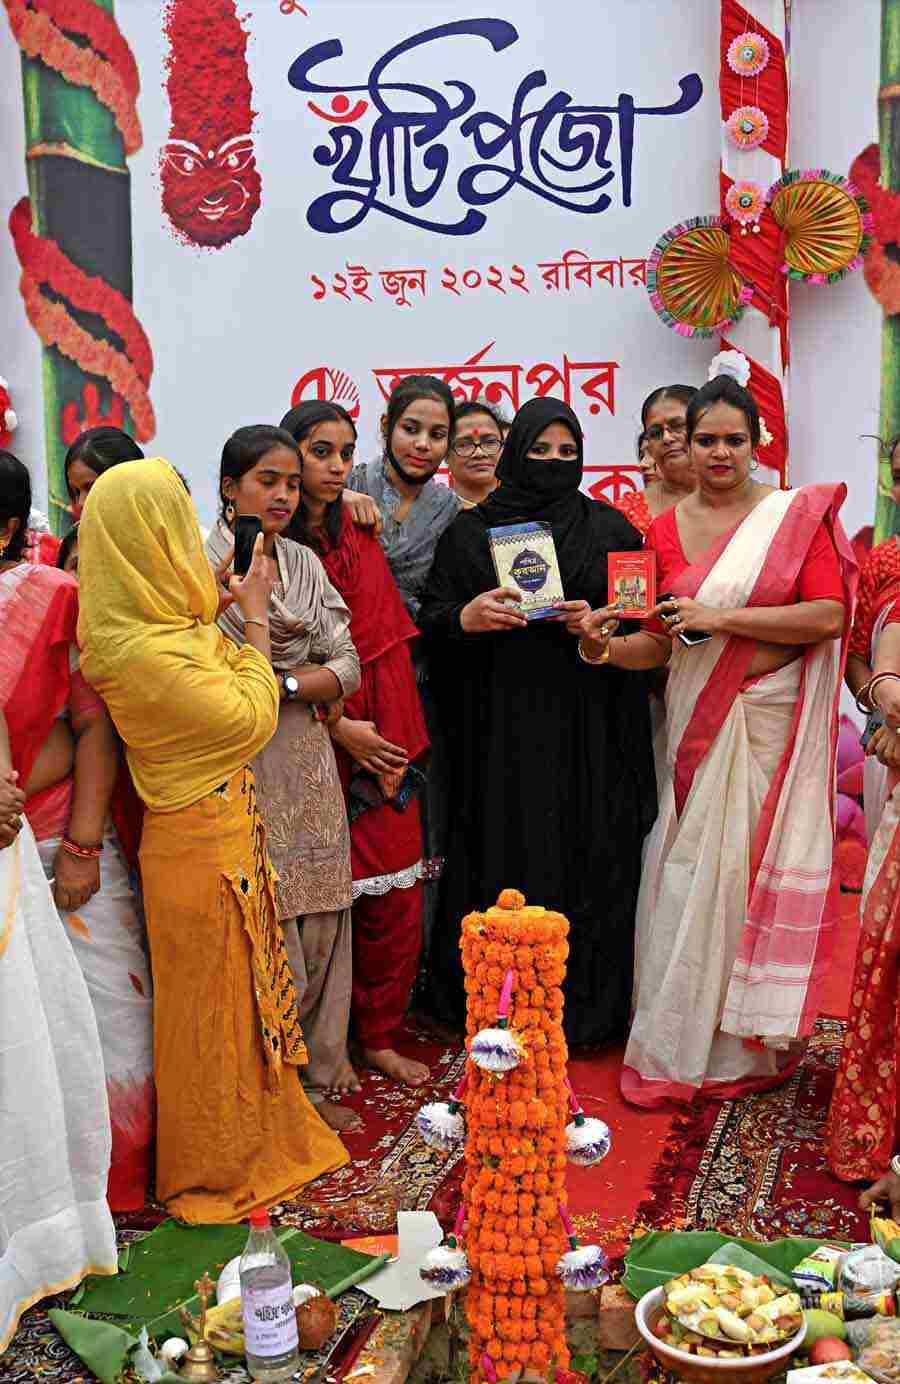 Women hold a Quran and a Bhagavad Gita at a ceremony marking the beginning of Durga Puja preparations. The event included women from the Muslim community as a gesture of religious harmony 